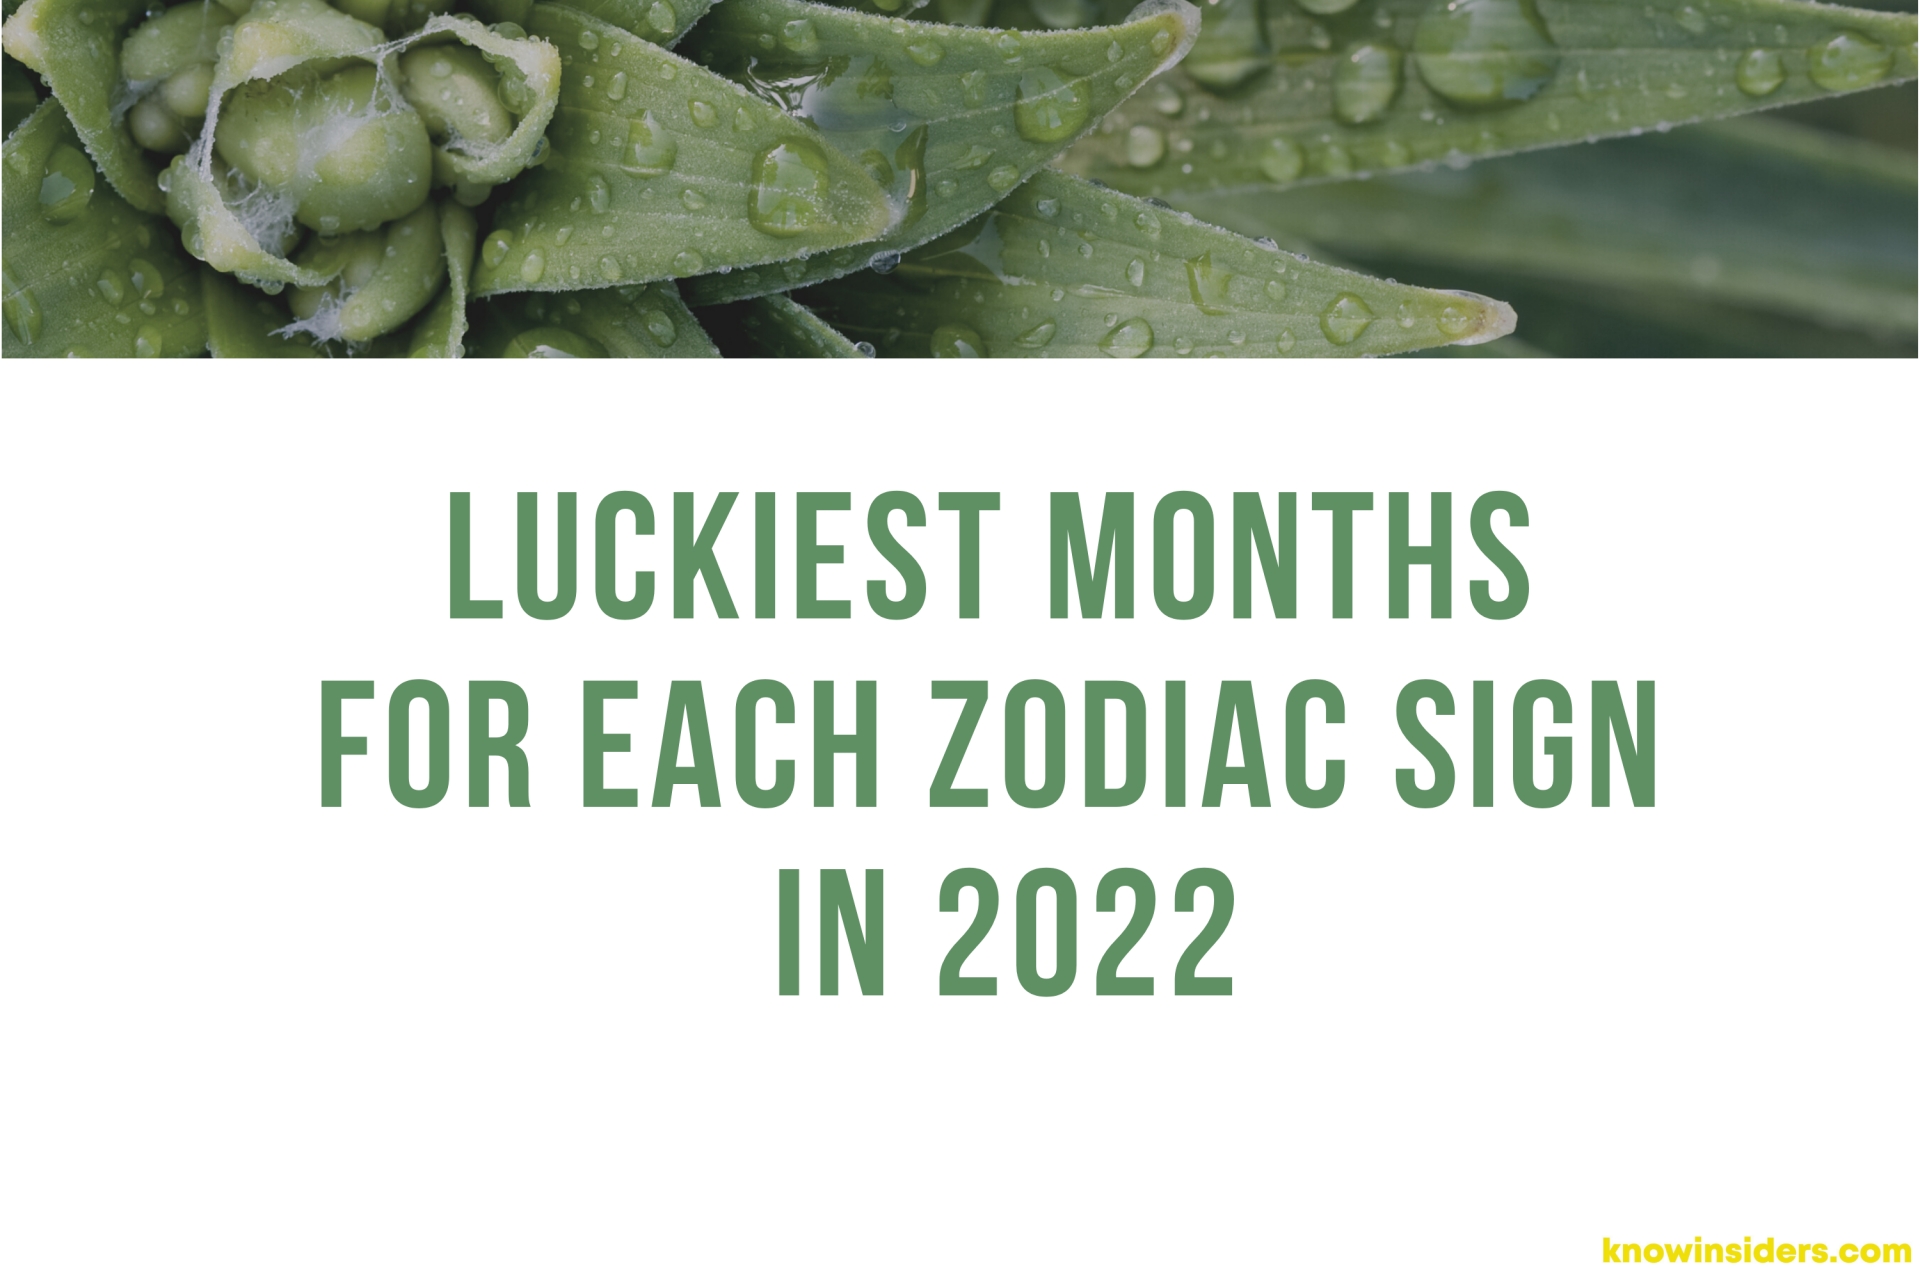 Luckiest Months For Every Zodiac Sign In 2022 According To Astrology